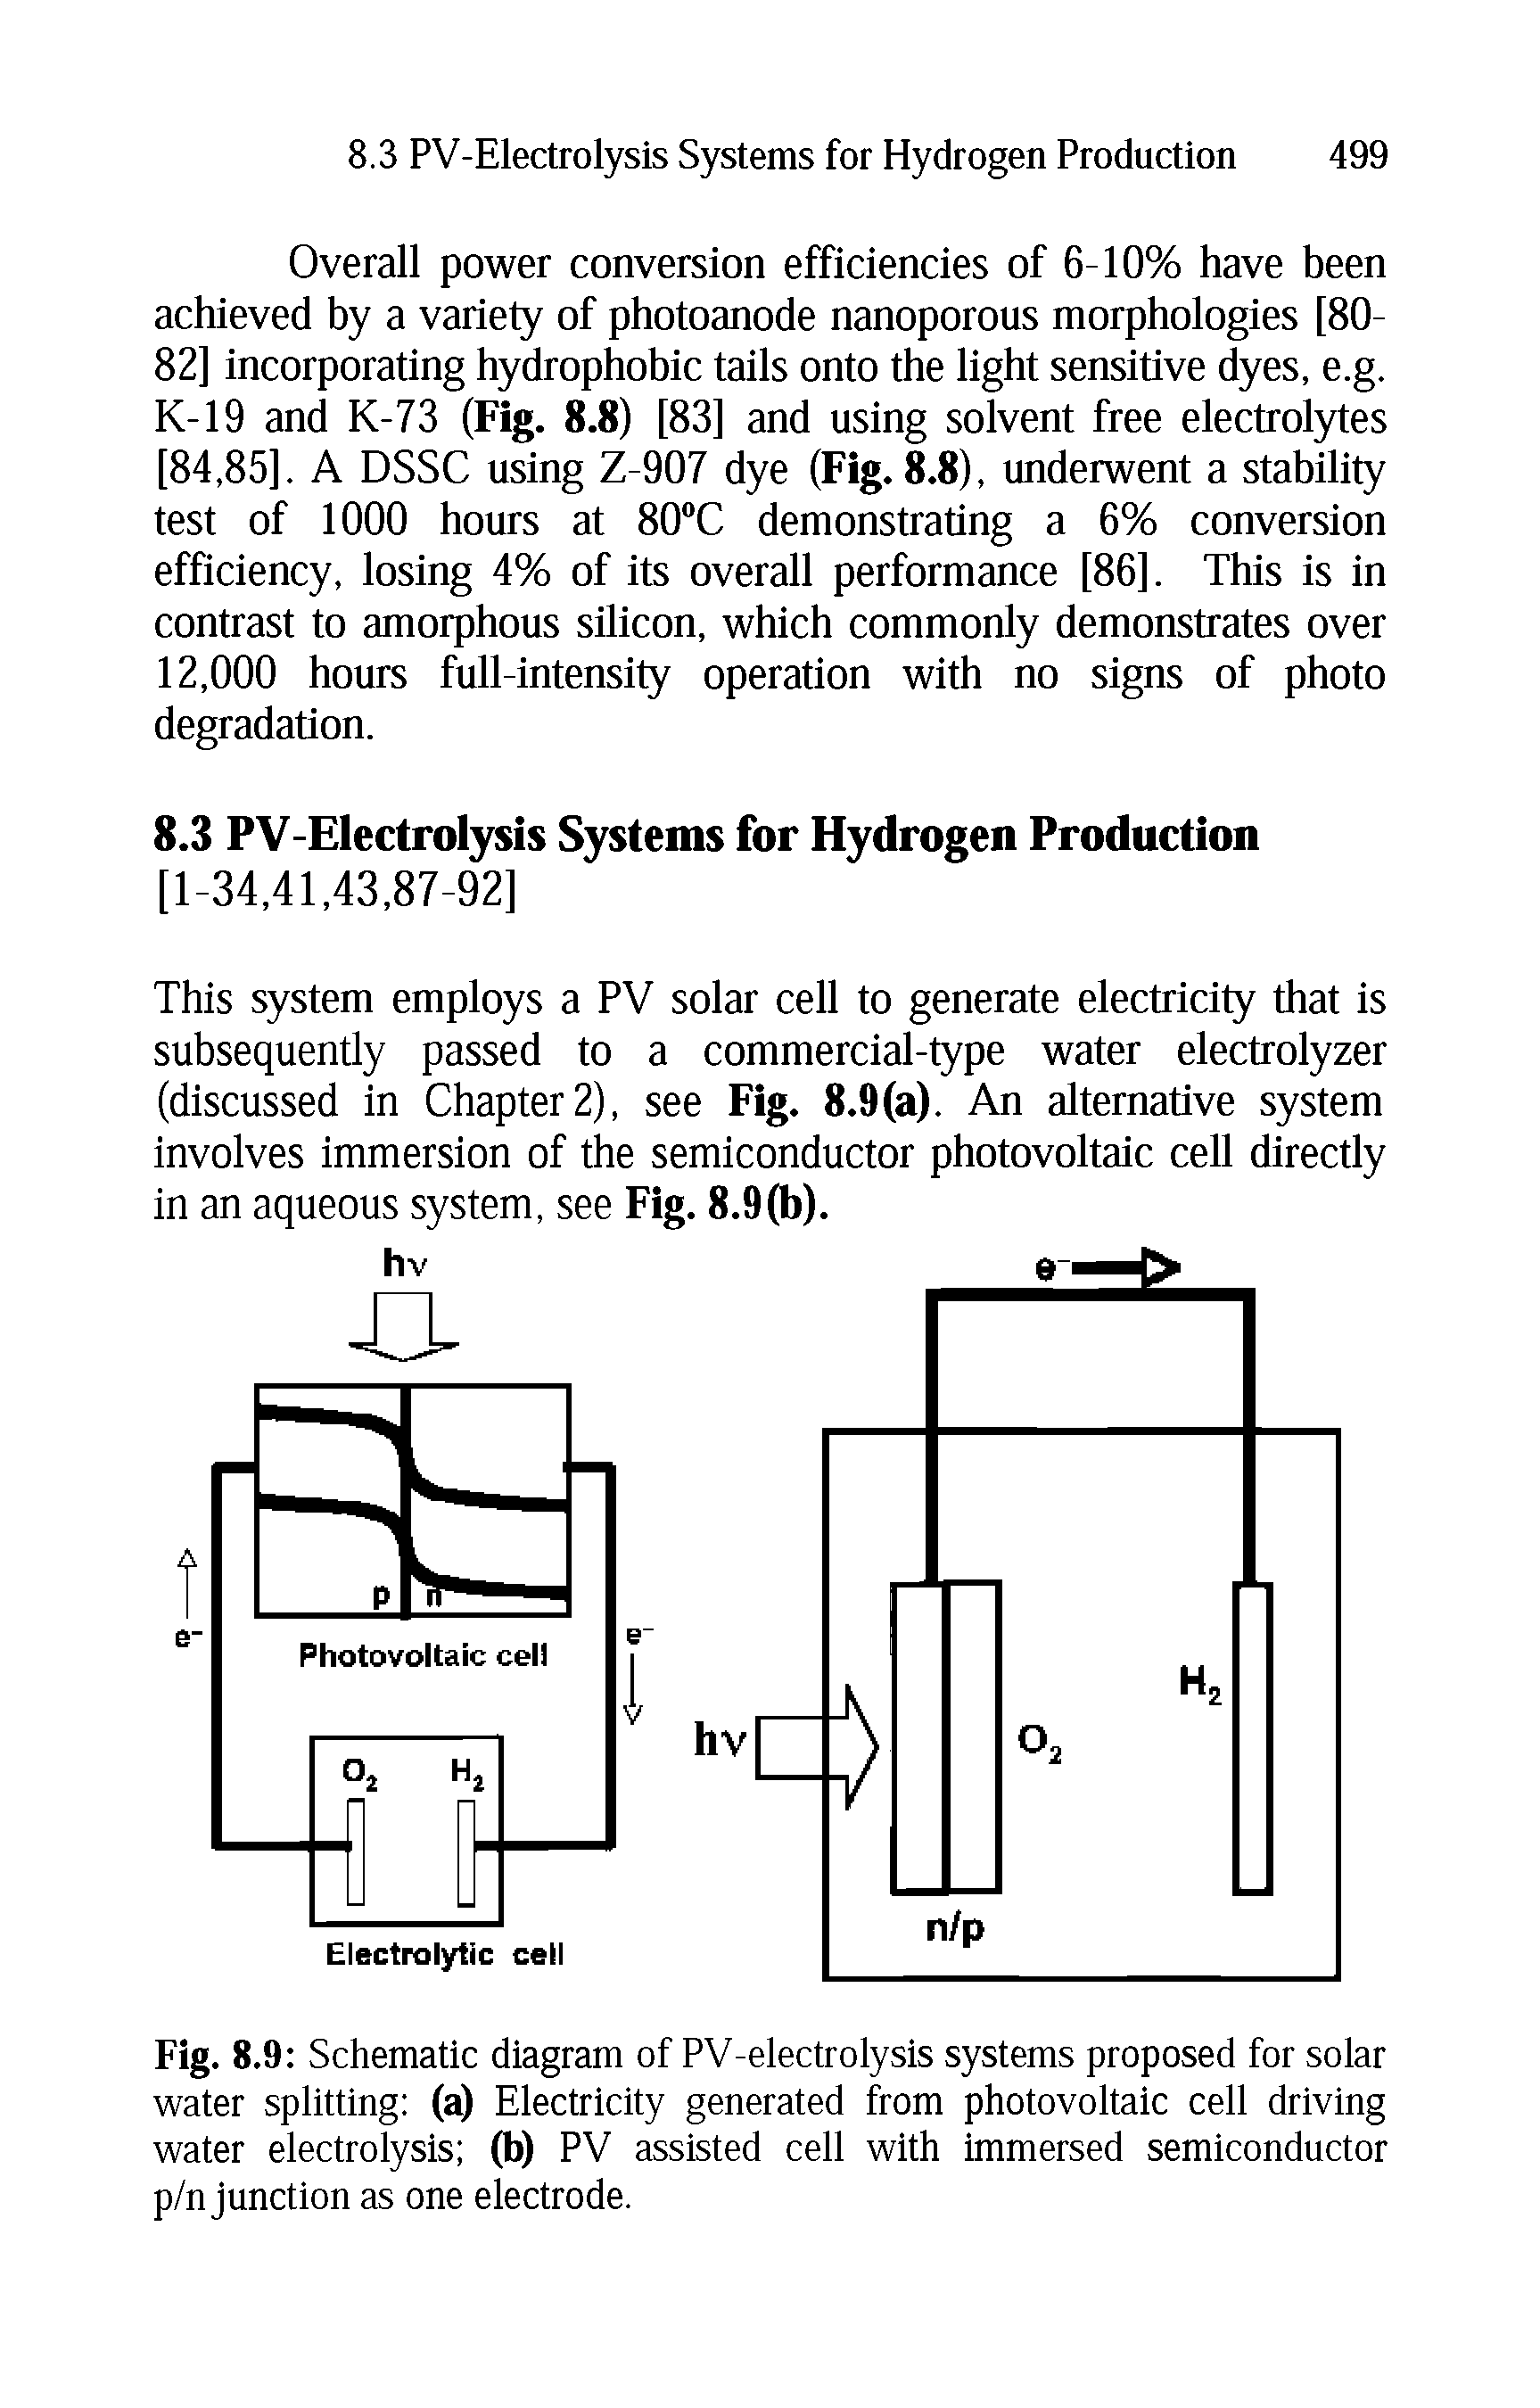 Fig. 8.9 Schematic diagram of PV-electrolysis systems proposed for solar water splitting (a) Electricity generated from photovoltaic cell driving water electrolysis (b) PV assisted cell with immersed semiconductor p/n junction as one electrode.